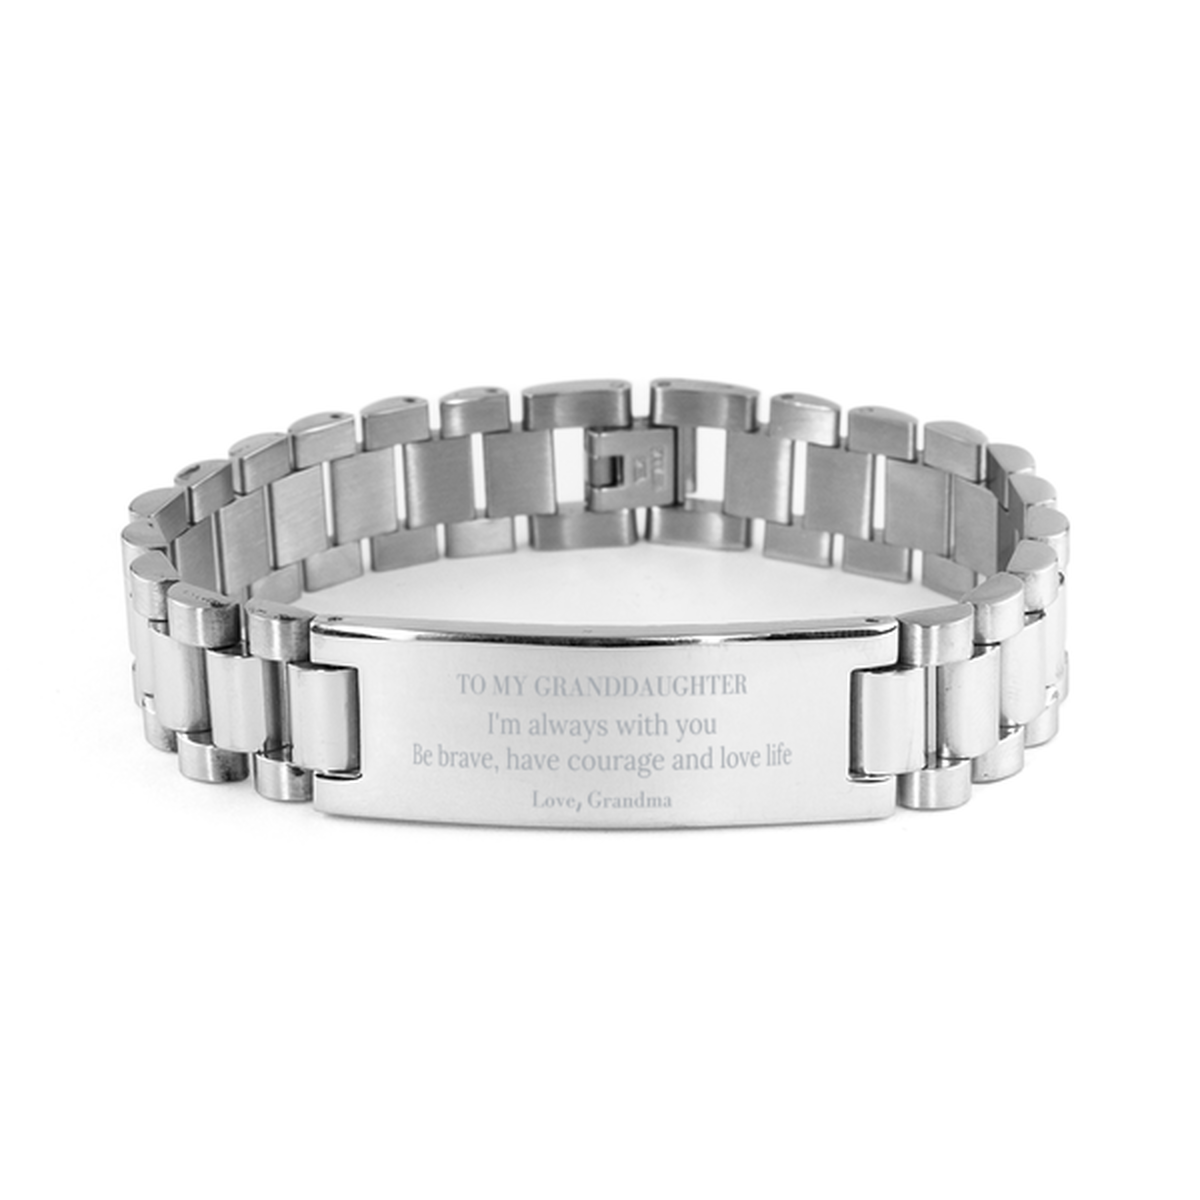 To My Granddaughter Gifts from Grandma, Unique Ladder Stainless Steel Bracelet Inspirational Christmas Birthday Graduation Gifts for Granddaughter I'm always with you. Be brave, have courage and love life. Love, Grandma